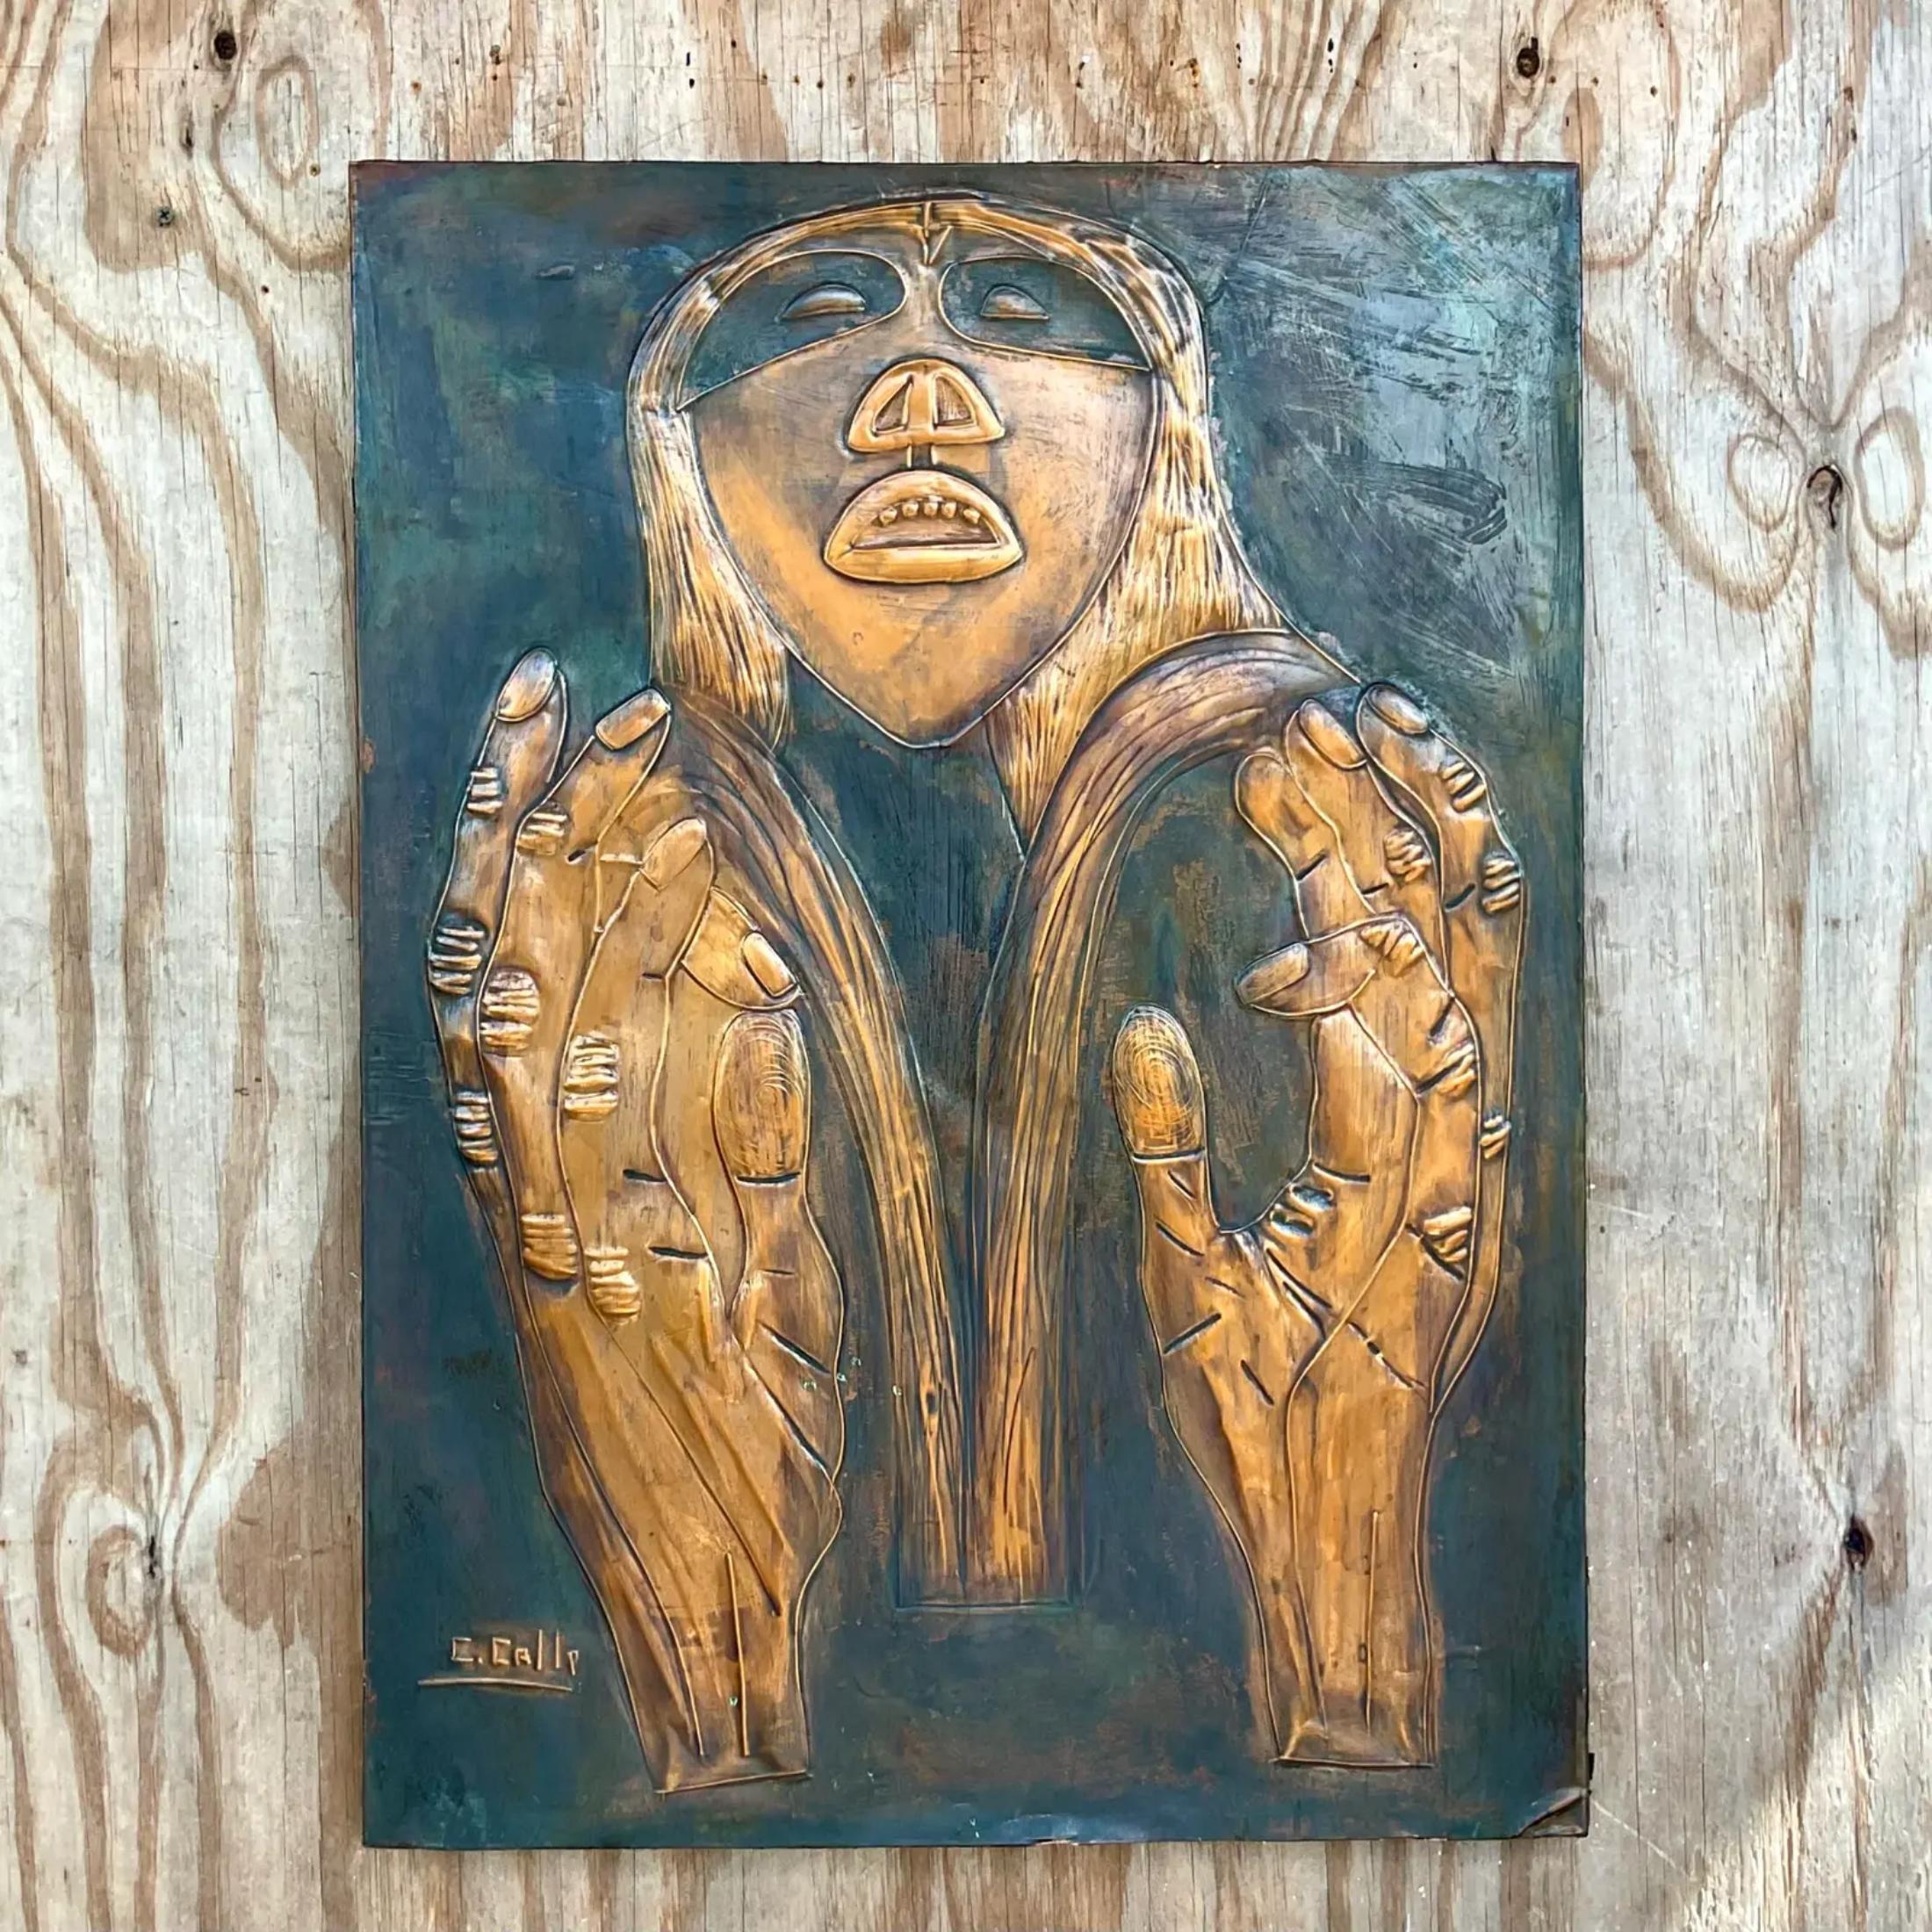 A fabulous vintage Boho copper panel. A chic hand hammered face with a brutalist style. Signed by the artist. Acquired from a Palm Beach estate